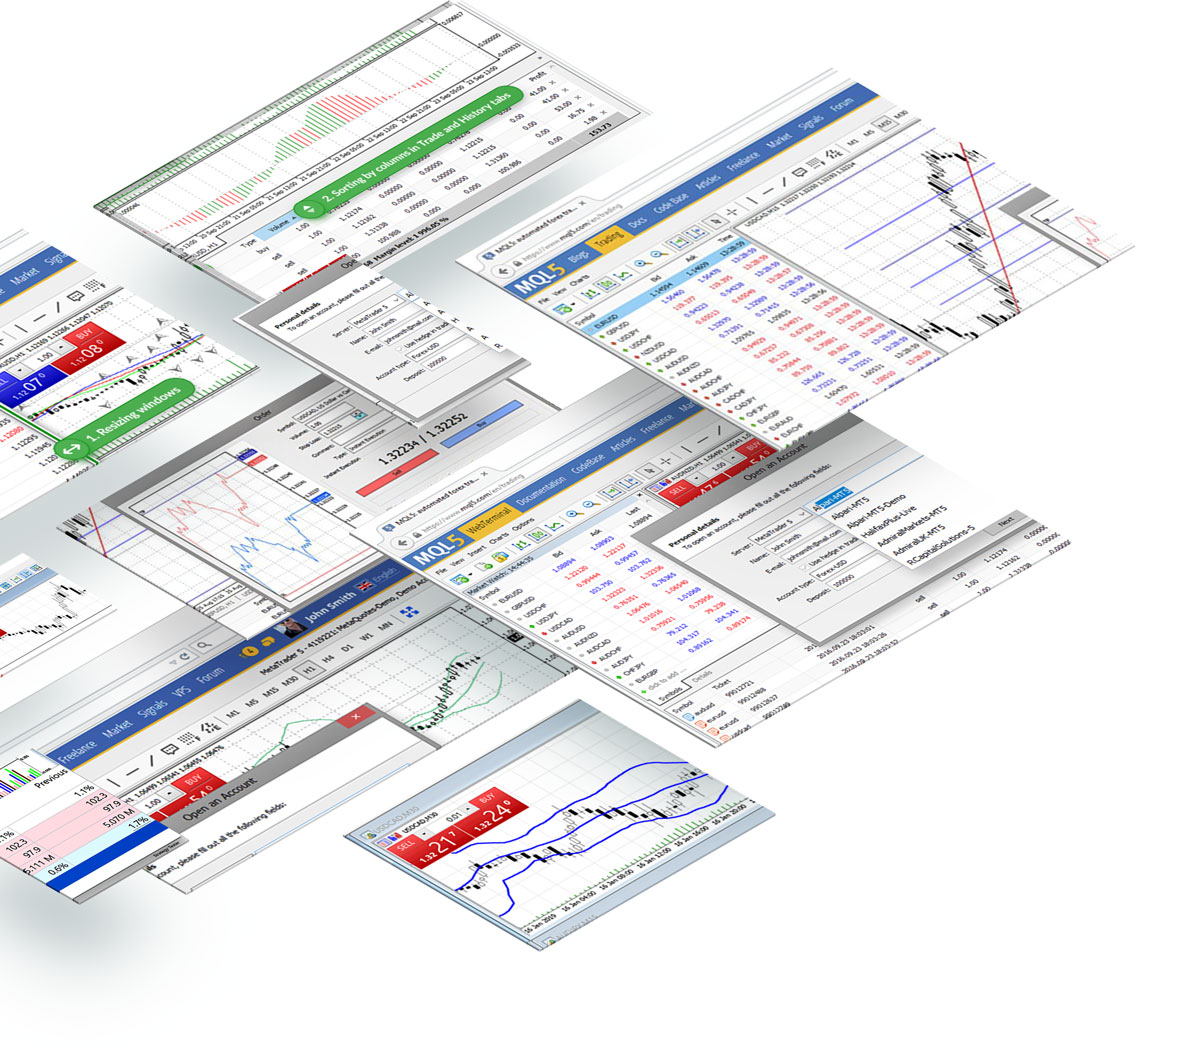 Tradeview customers can access financial analysis instruments perform trading operations and access the history of their trades with MT5 web terminal